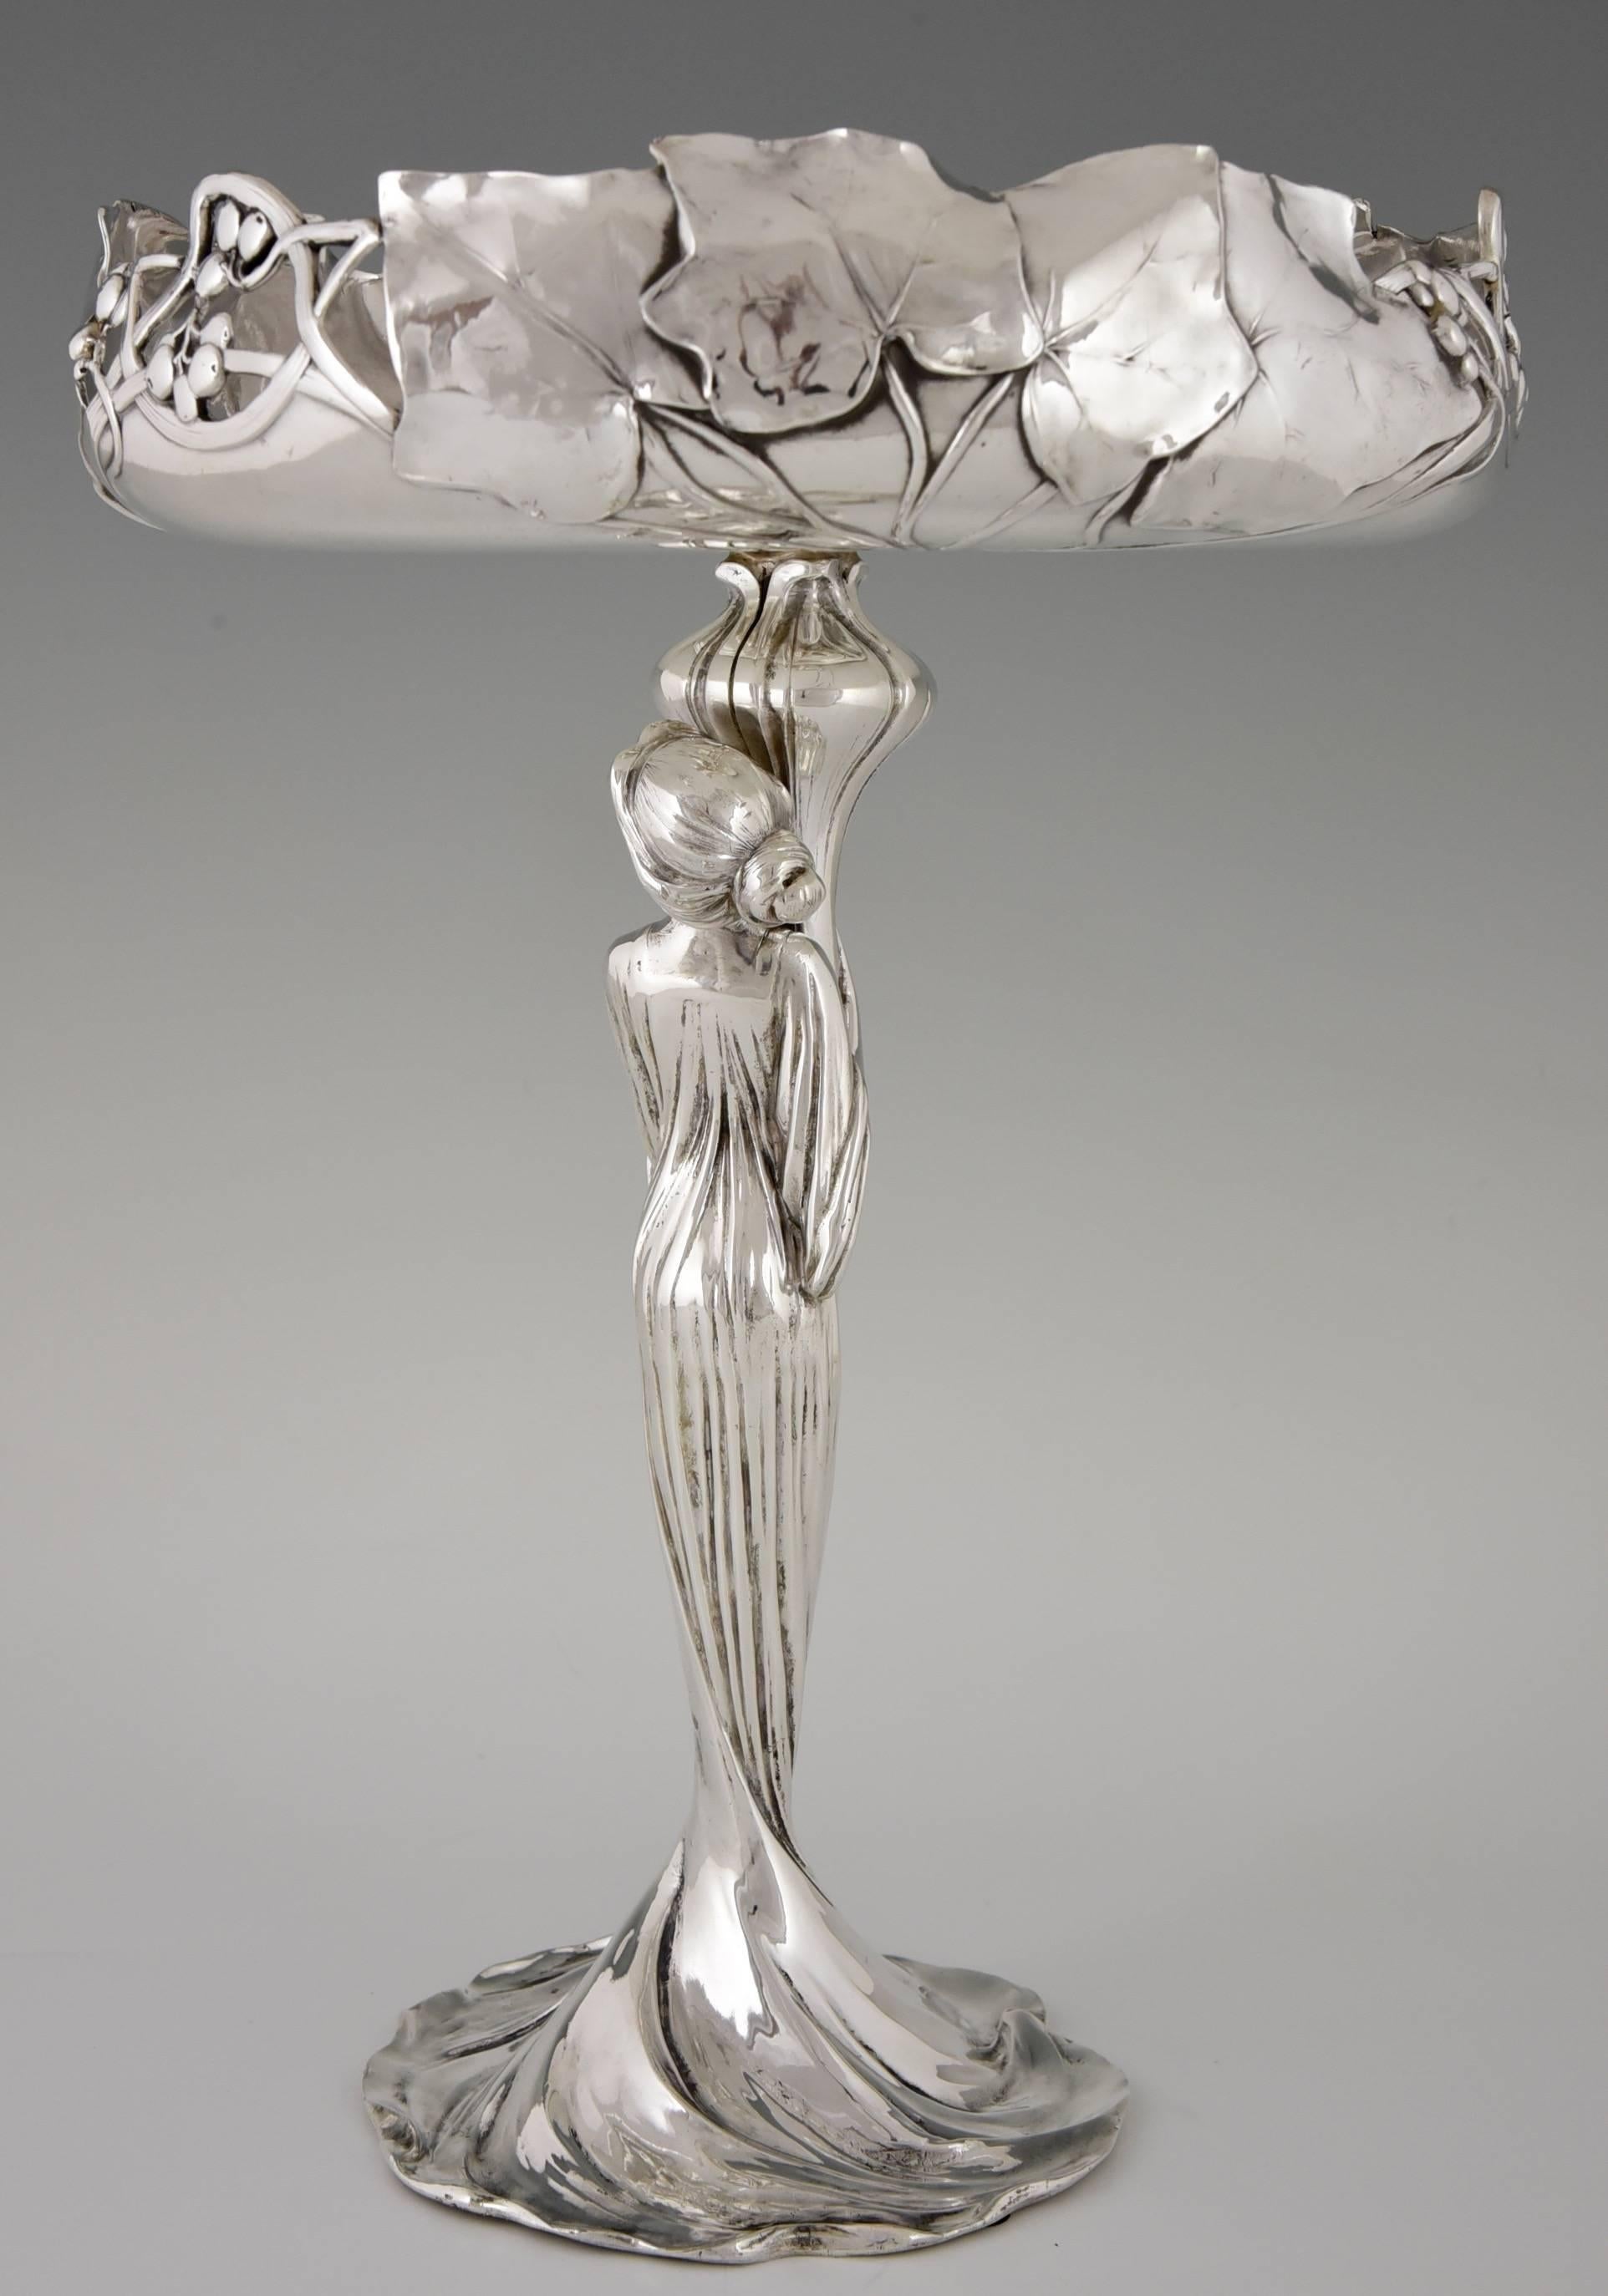 Silvered Centerpiece with Art Nouveau Maiden with Ivy Leaves and Foliage by WMF, 1906